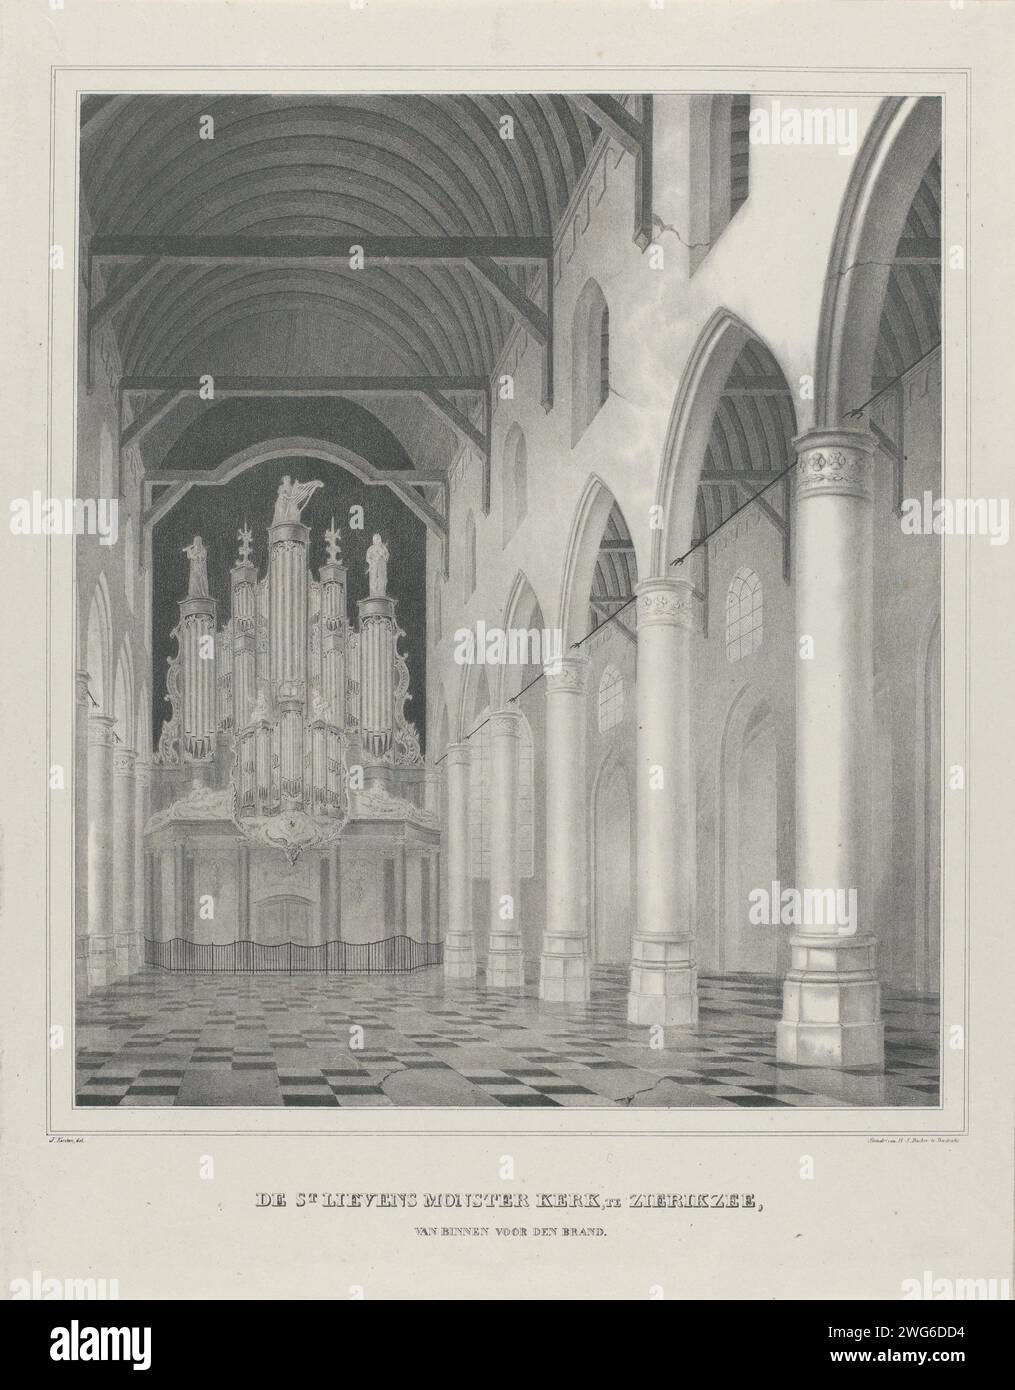 Interior of the Sint-Lievensmonsterkerk in Zierikzee, before the fire of 1832, 1832 print Interior of the Sint-Lievensmonsterkerk in Zierikzee, in Welstand, before the fire of 6 October 1832. Face in the interior towards the organ. See also the pendant with the ruins of the church after the fire. Print Maker: Zierikzee chart Drawing by: Zierikzeeprinter: Dordrecht paper  interior of church Sint-Lievensmonsterkerk Stock Photo